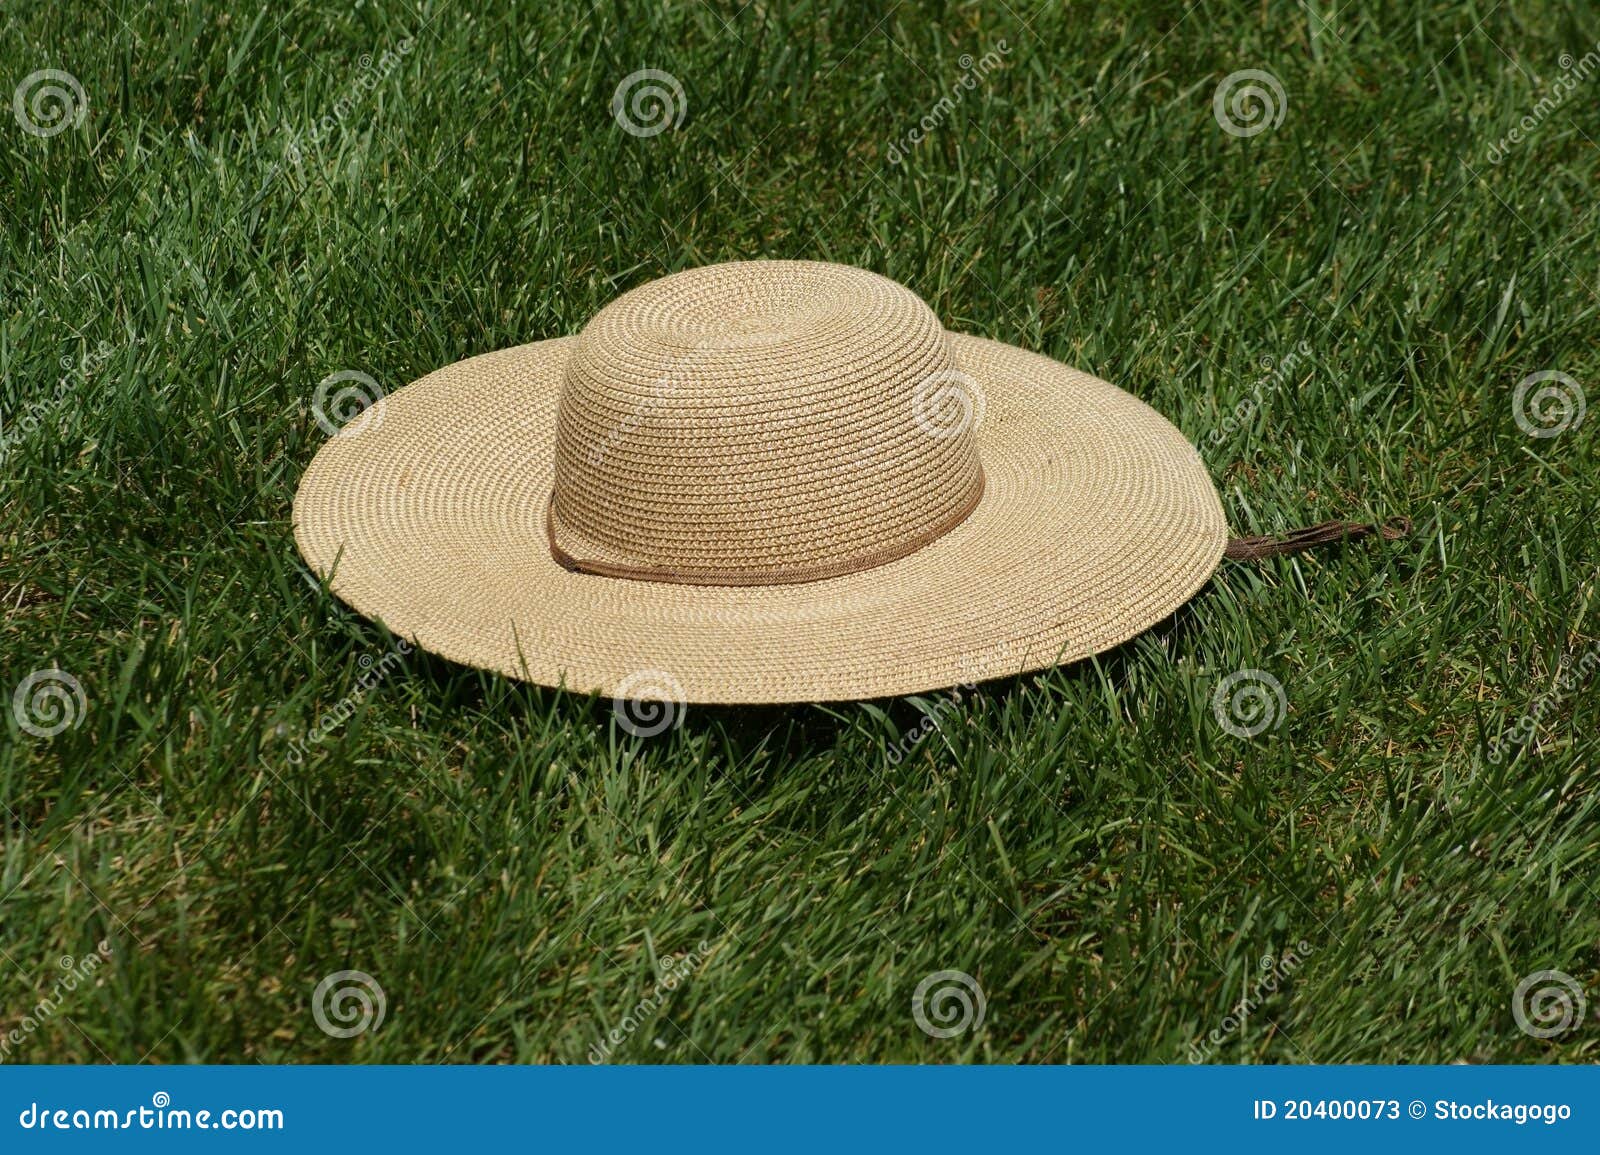 Straw Hat on Grass stock image. Image of clothing, summer - 20400073